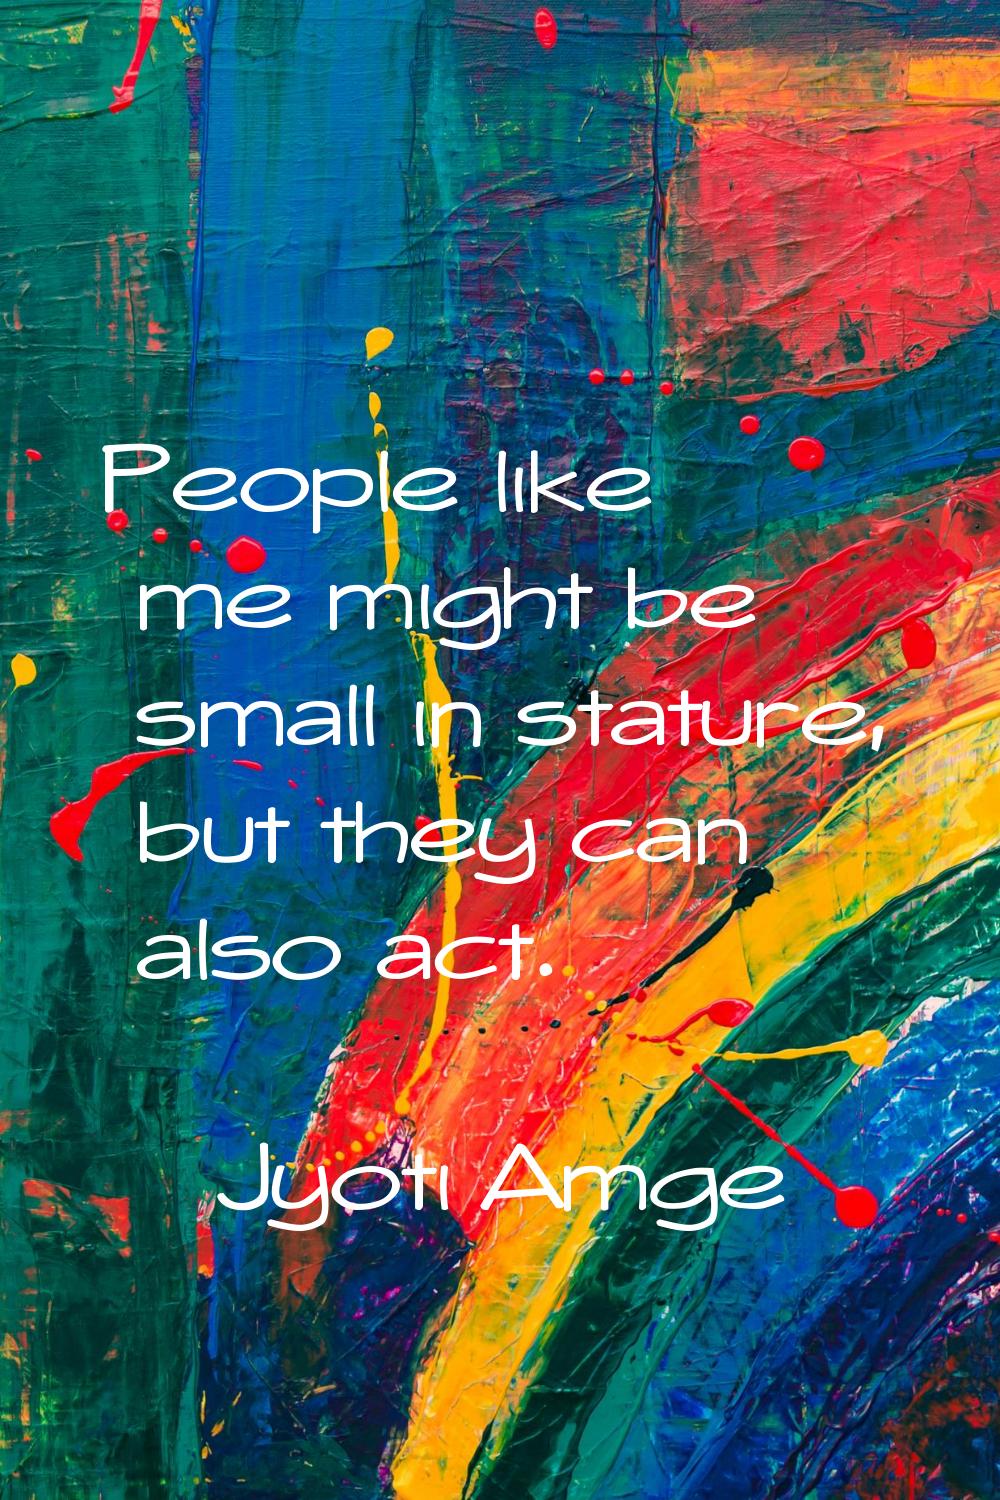 People like me might be small in stature, but they can also act.